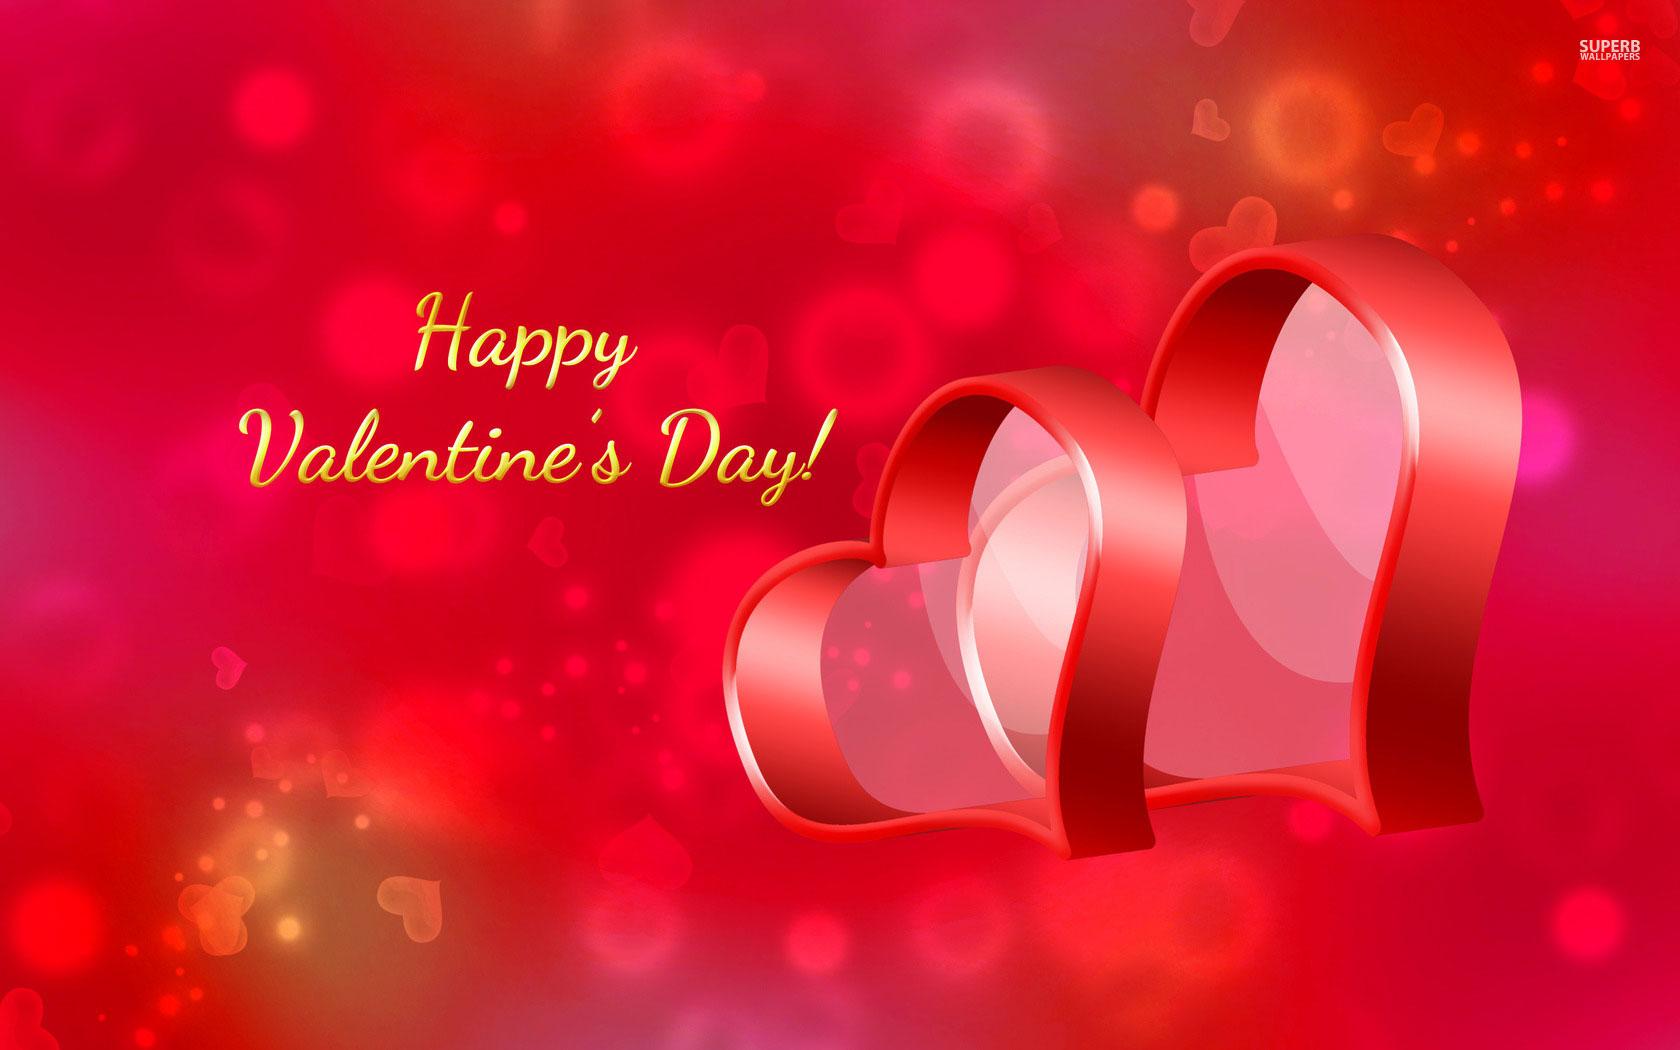 Romantic Valentines Day Wallpaper And HD Image Love